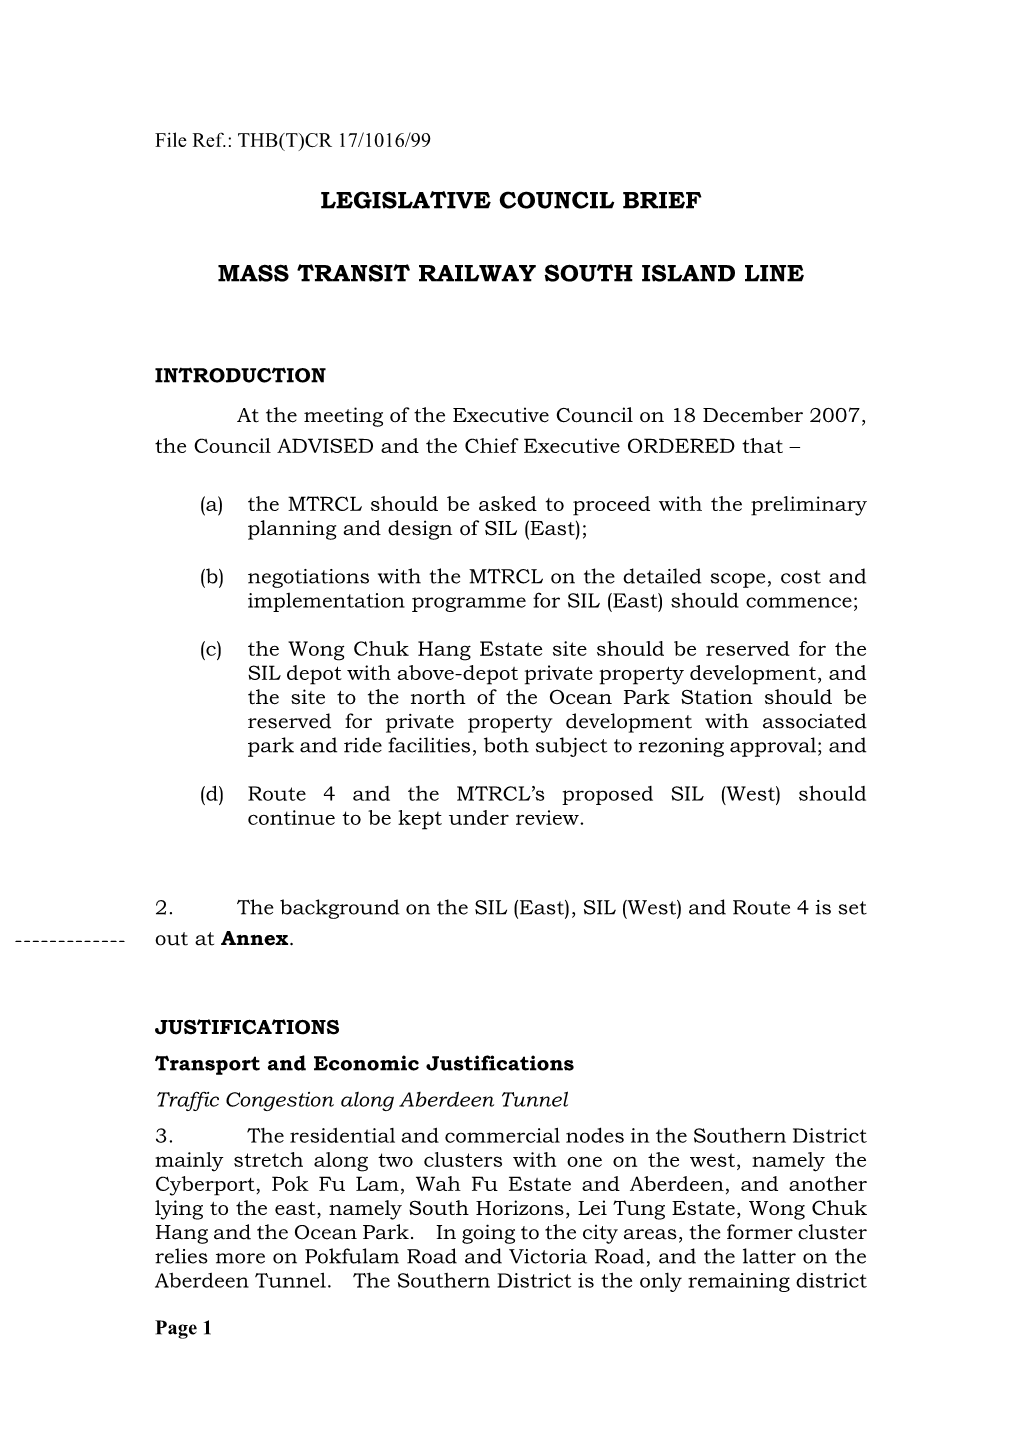 Administration's Paper on Mass Transit Railway South Island Line